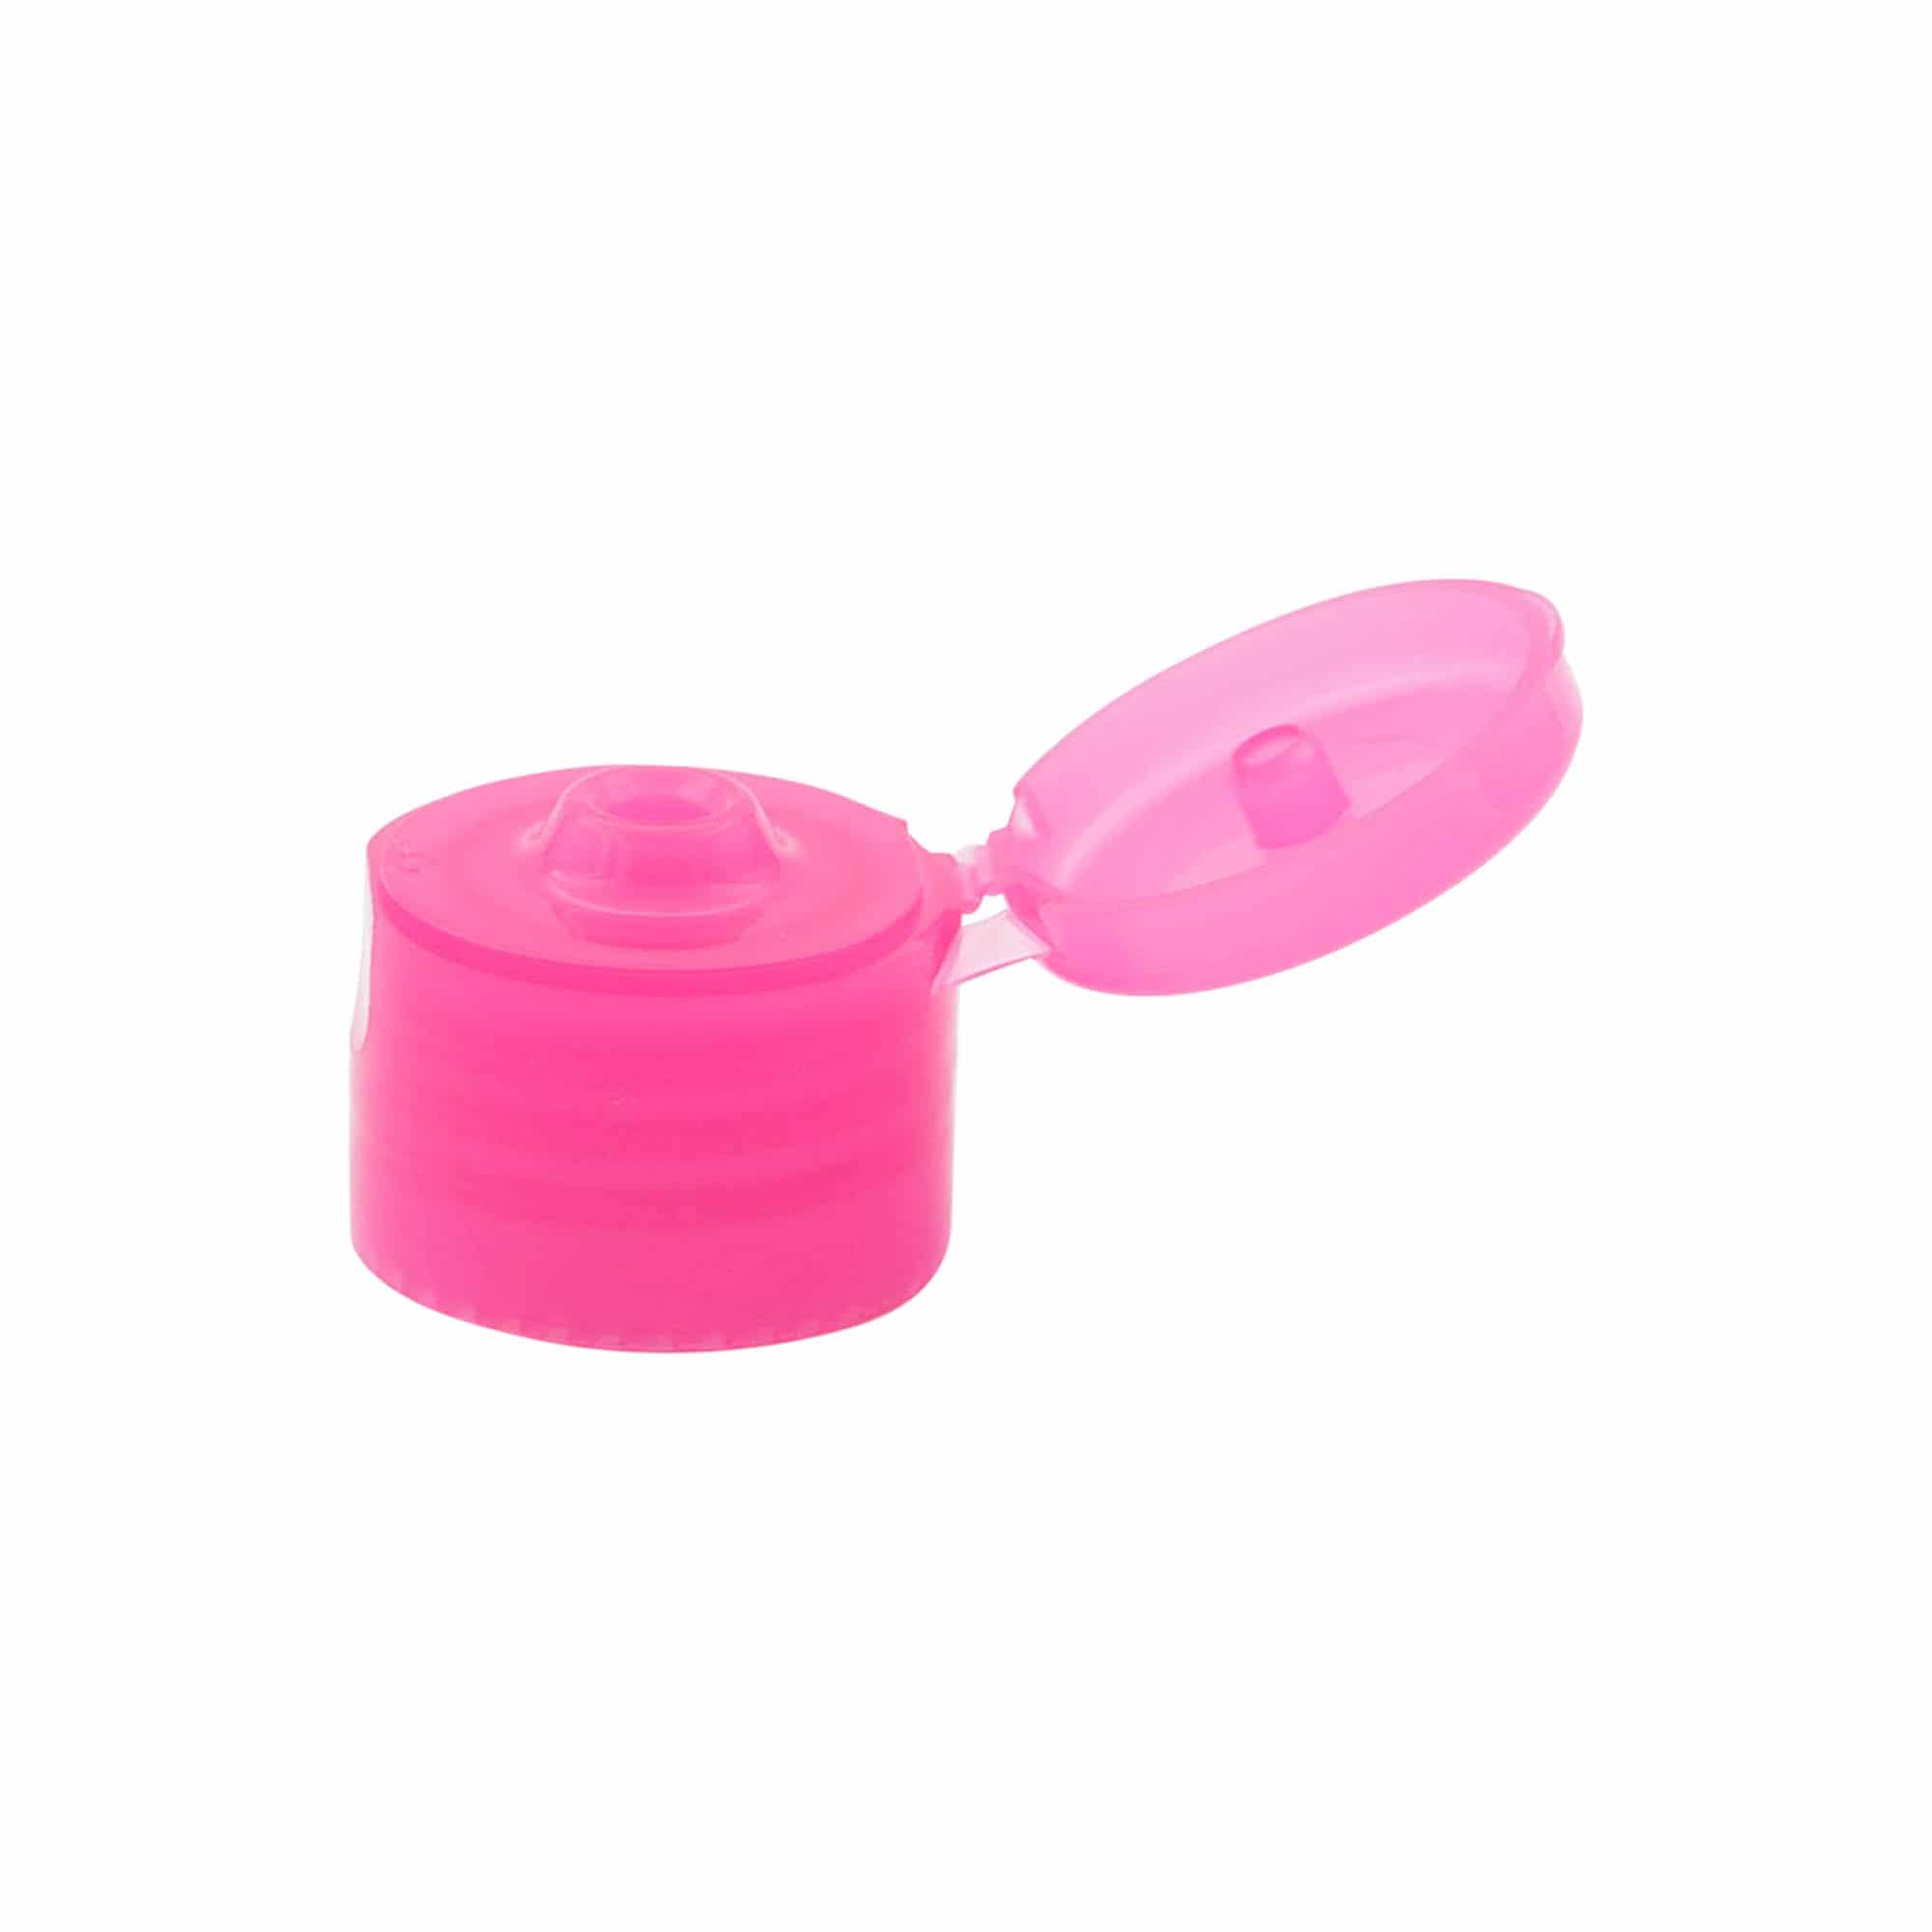 Hinged screw cap, PP plastic, pink, for opening: GPI 24/410